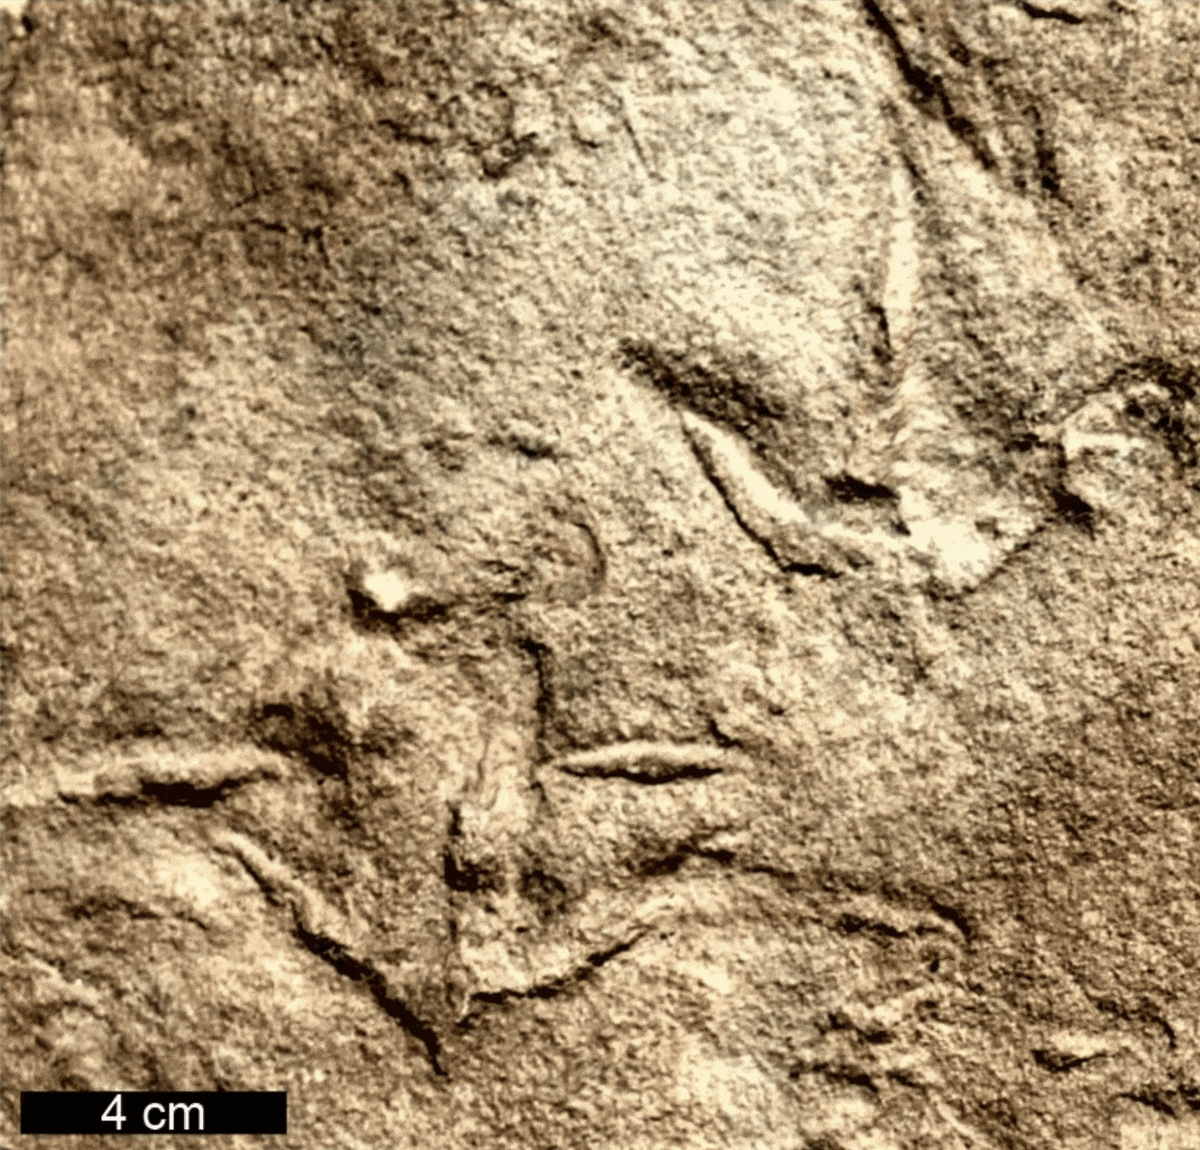 Fossilized&nbsp;Trisauropodiscus&nbsp;tracks from more than 210 million years ago (marked with 4 cm scale) compared to modern bird tracks from March 2018 (marked with 3 cm scale)